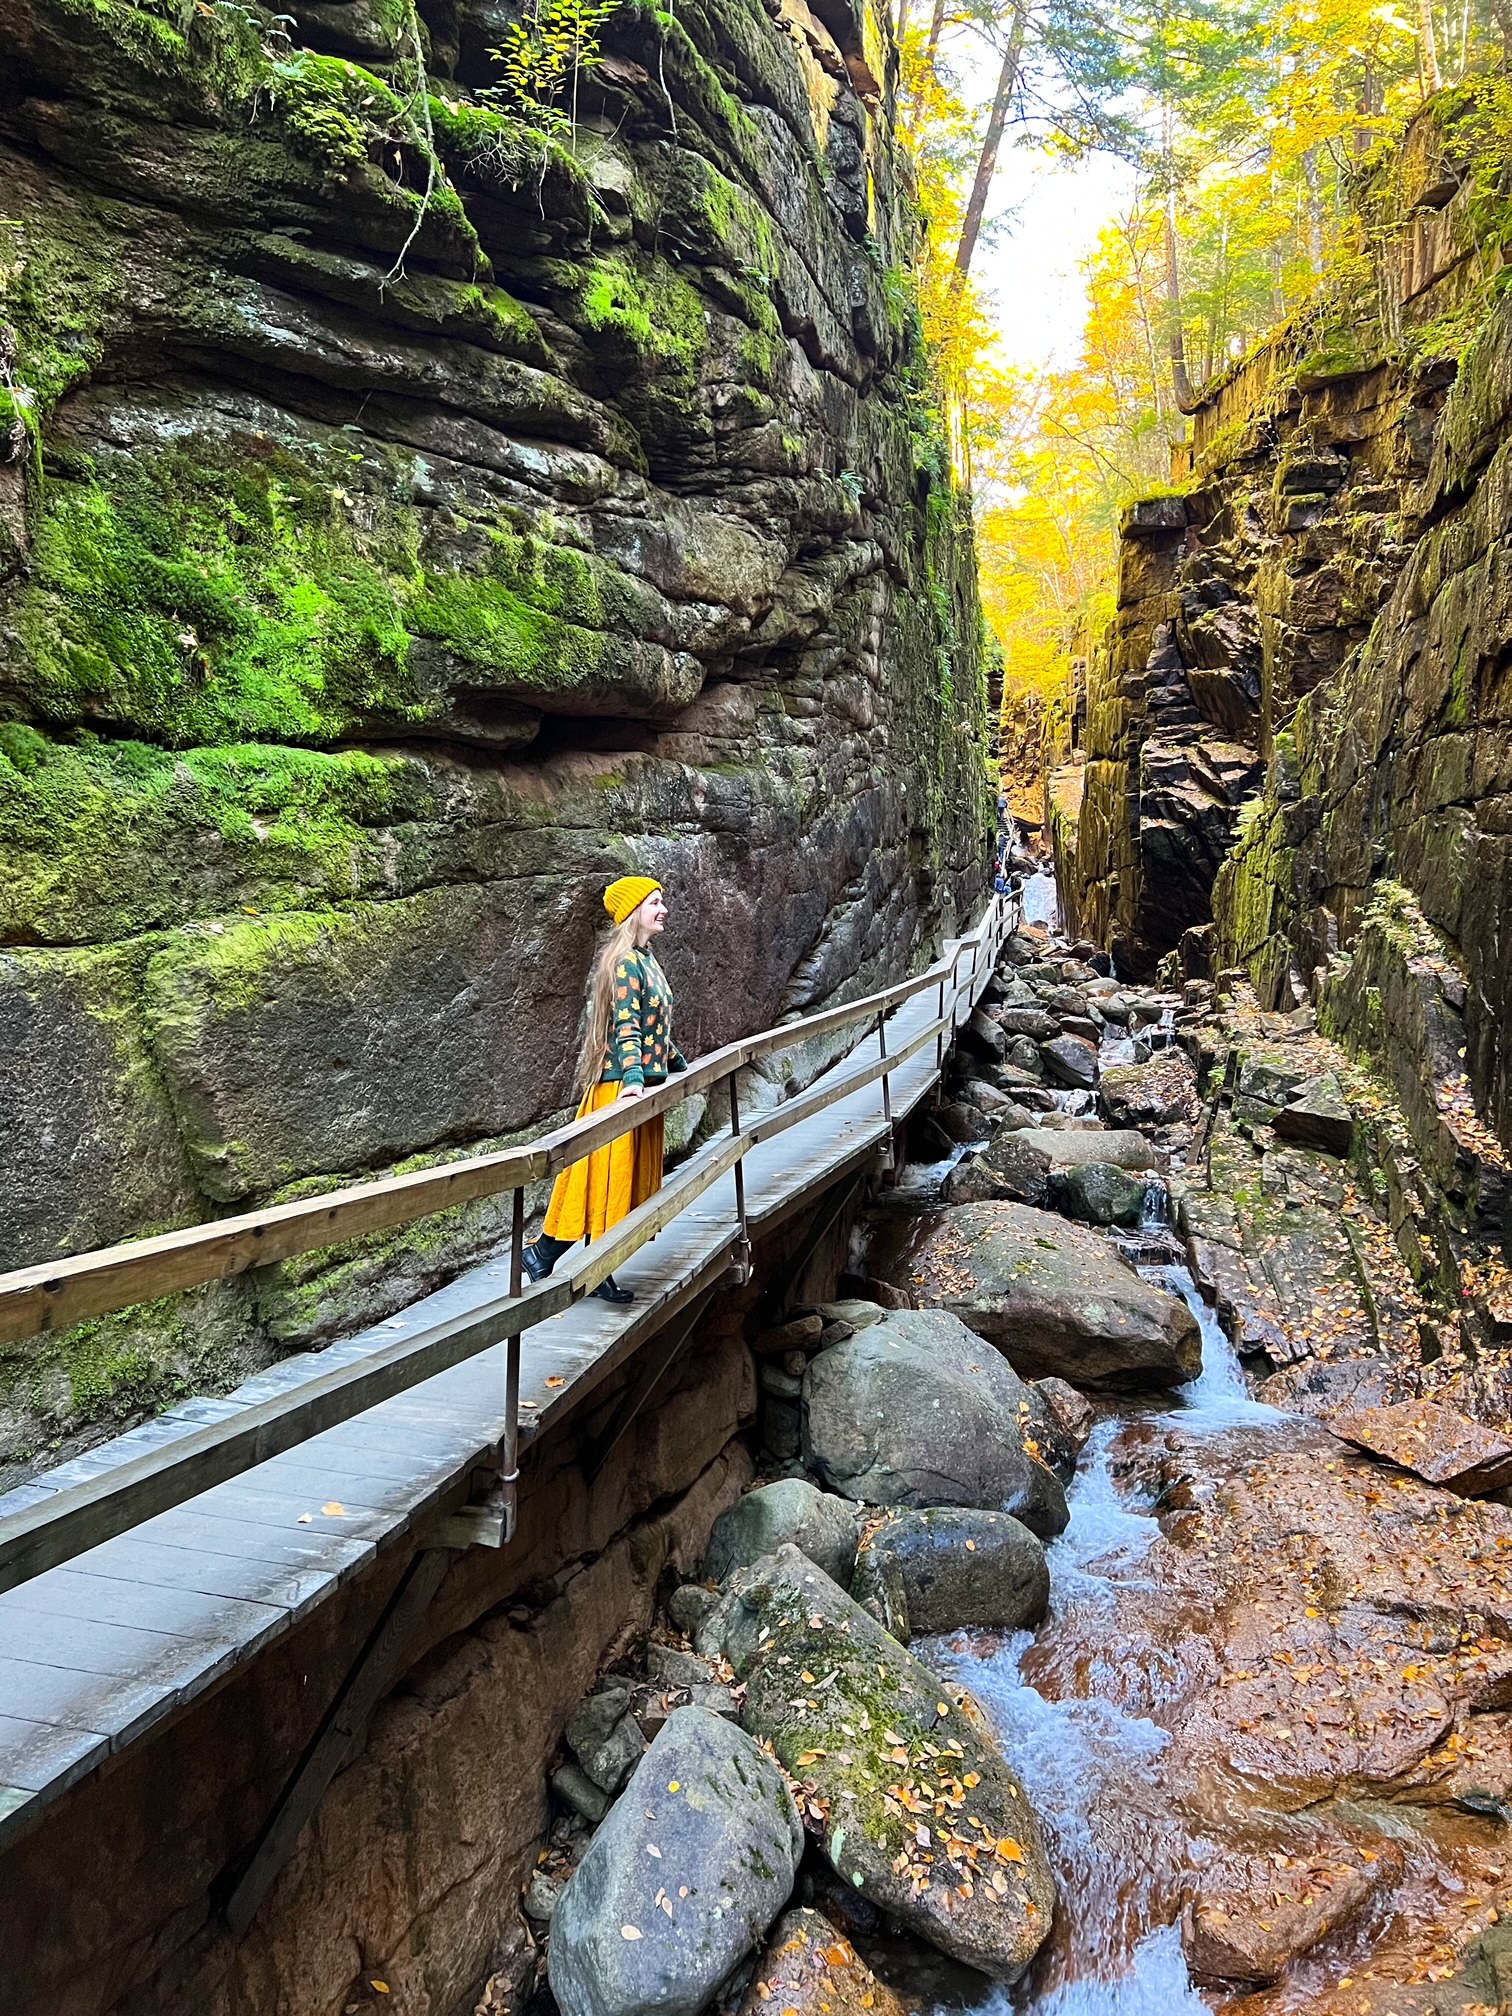 A woman in a yellow hat and skirt stands in the gorge, leaning over a handrail and enjoying being in between rocky formations. 